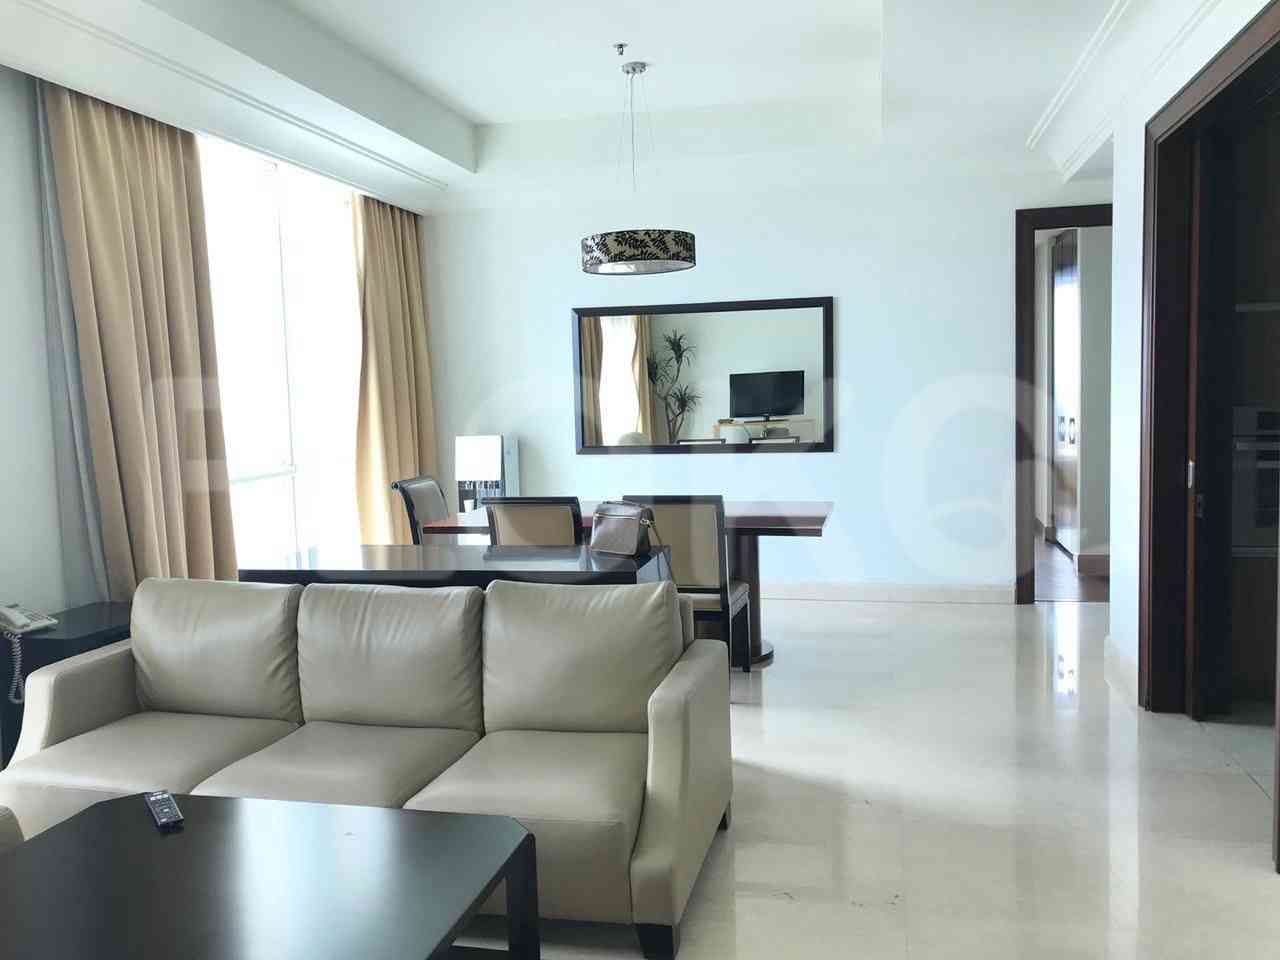 2 Bedroom on 10th Floor for Rent in Pakubuwono View - fgaa9f 2